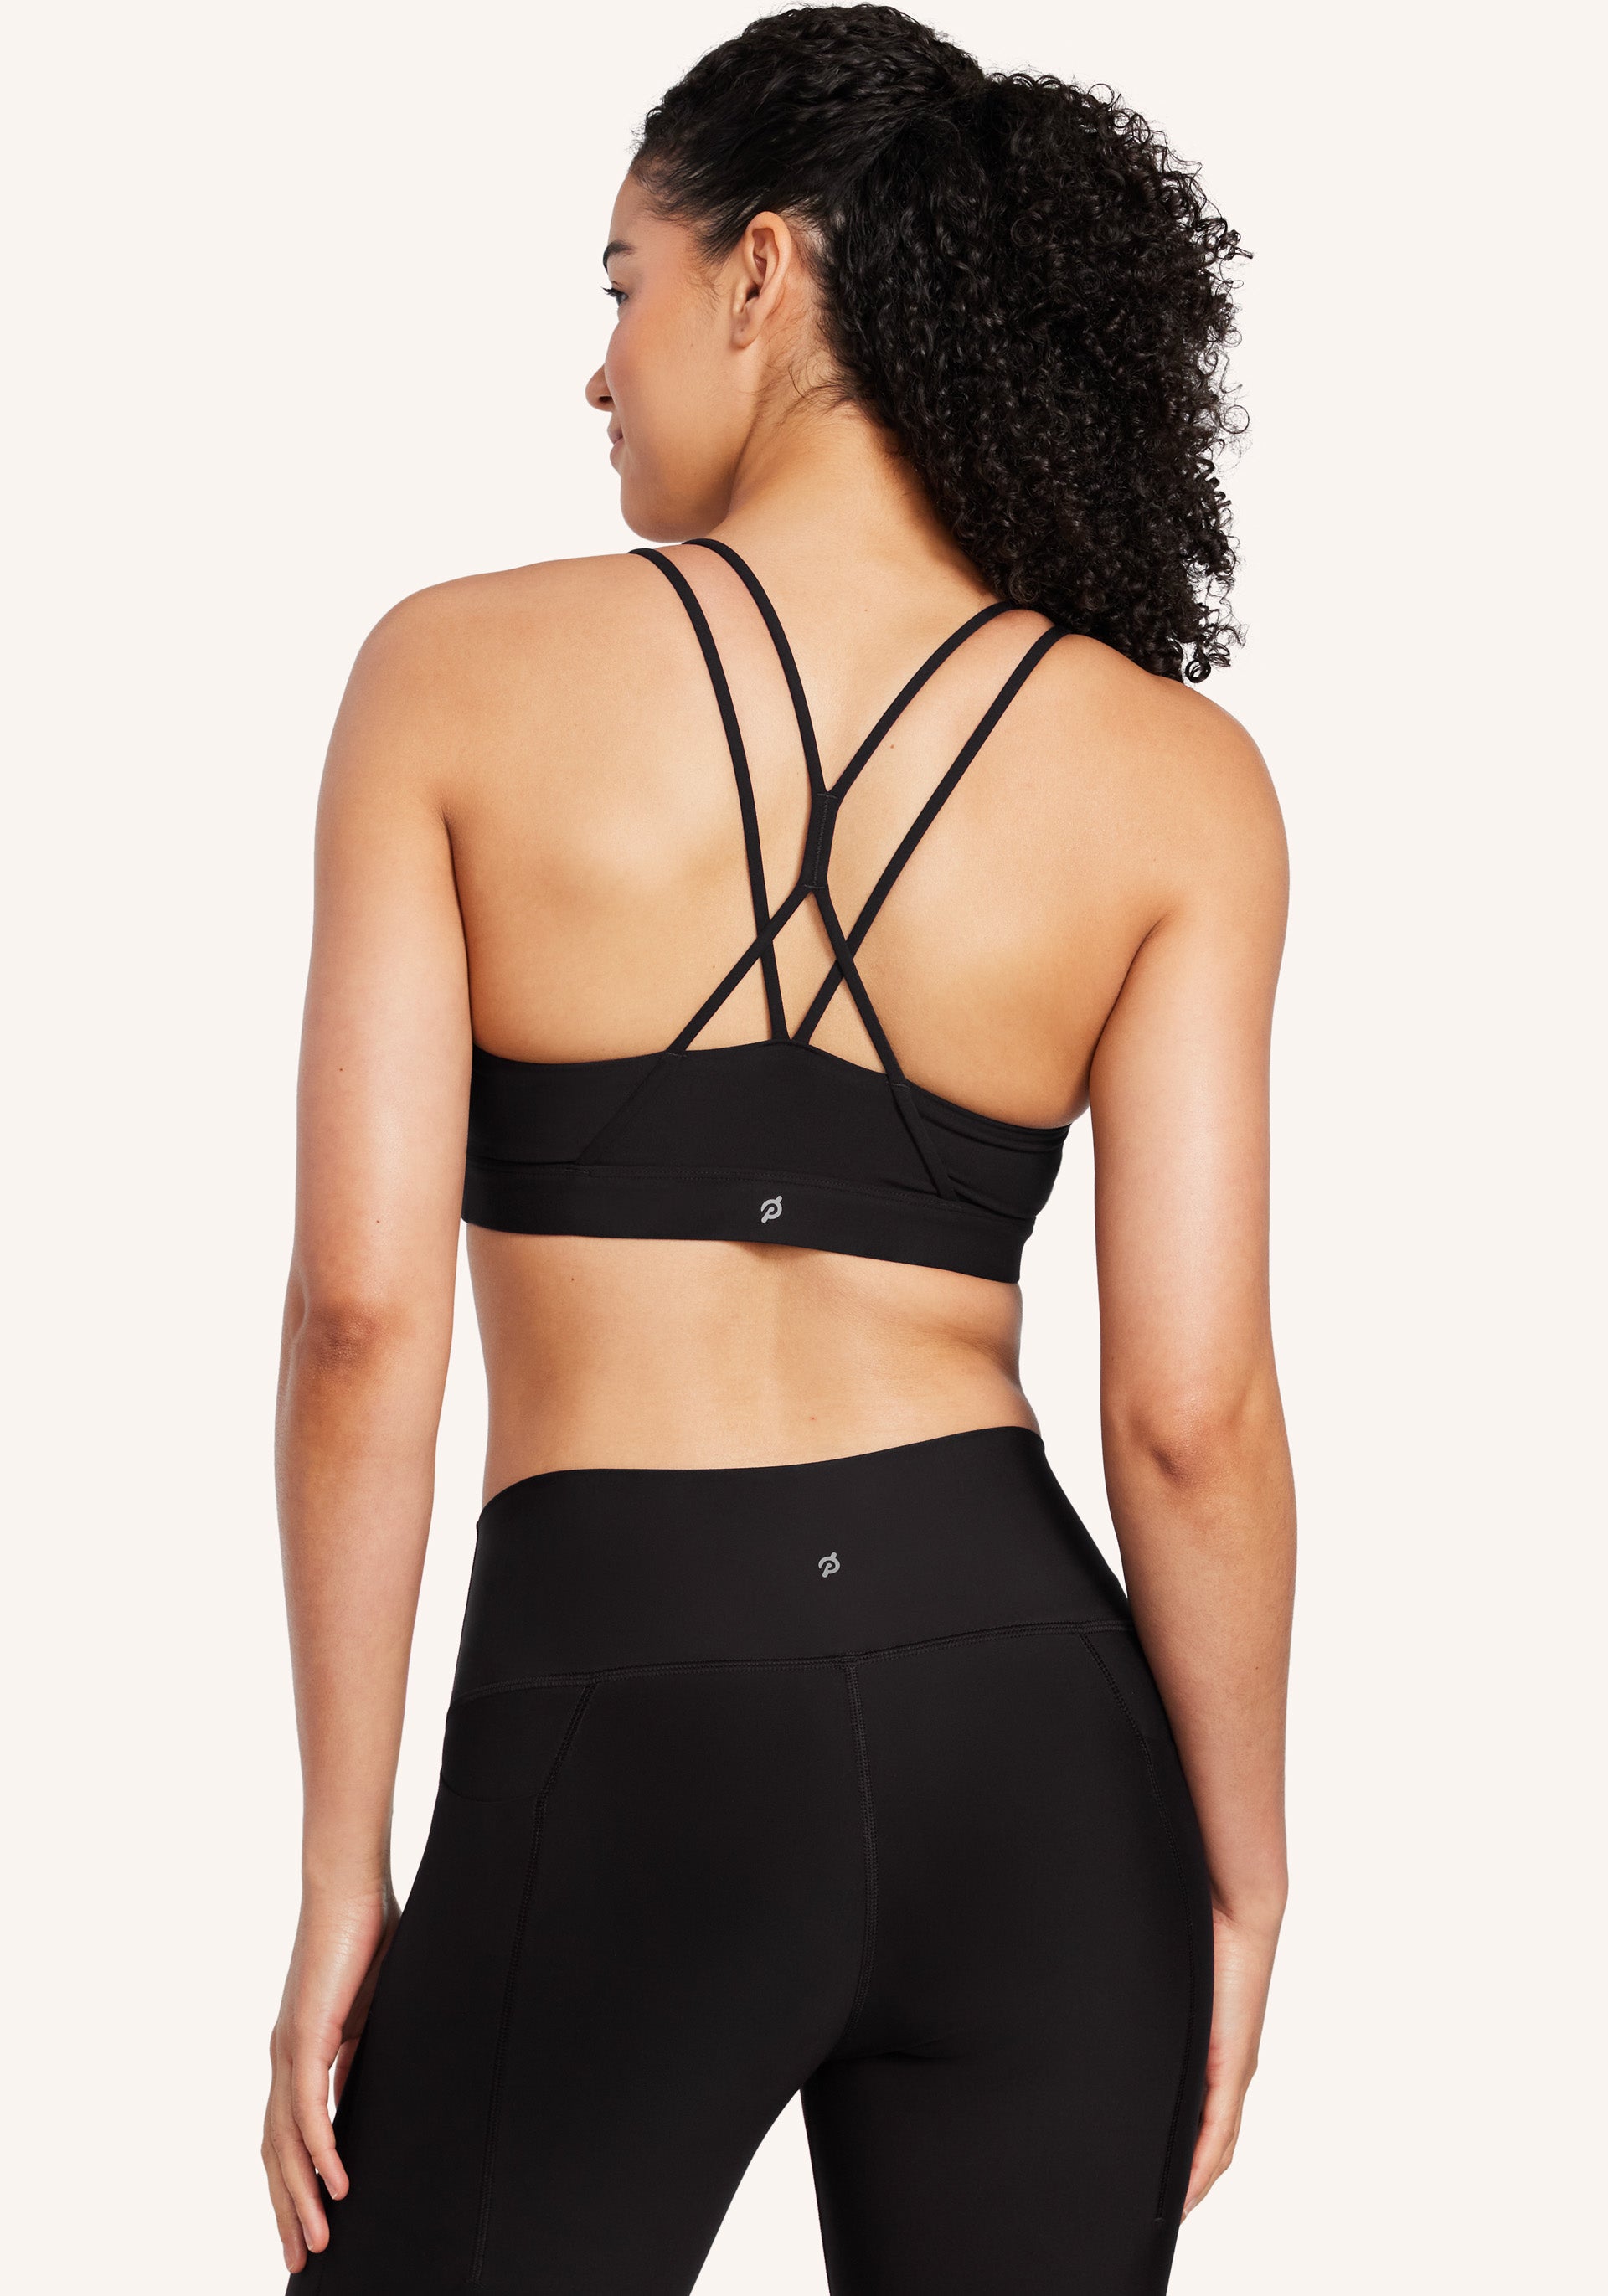 Style spotlight: the Cadent Strappy Elevate Thin Band Bra - if you love our  bestselling Cadent bra, you'll love this all-new…